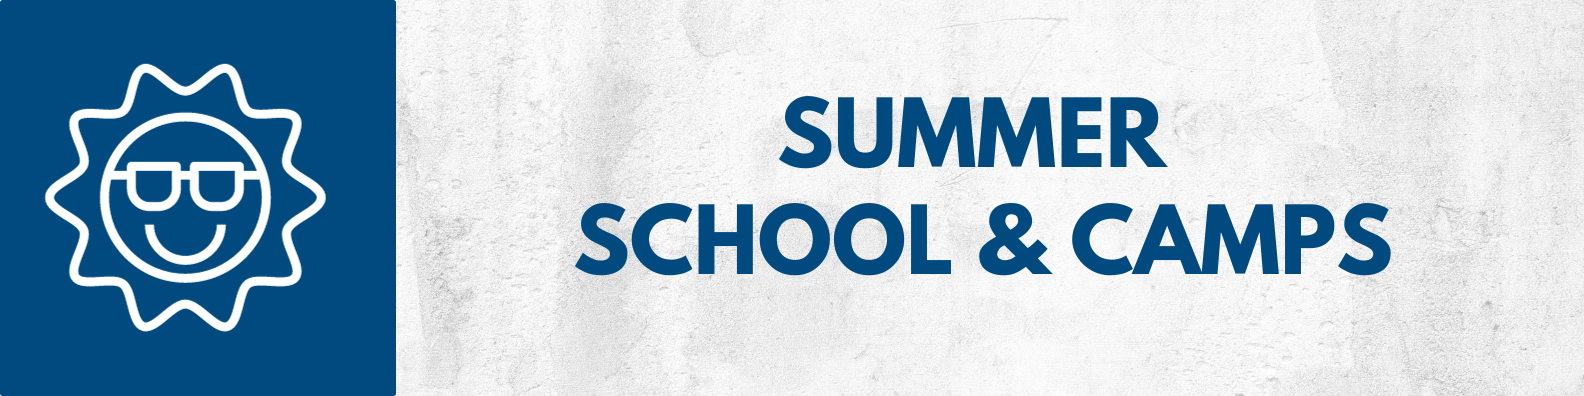 Summer School with Learn More Button